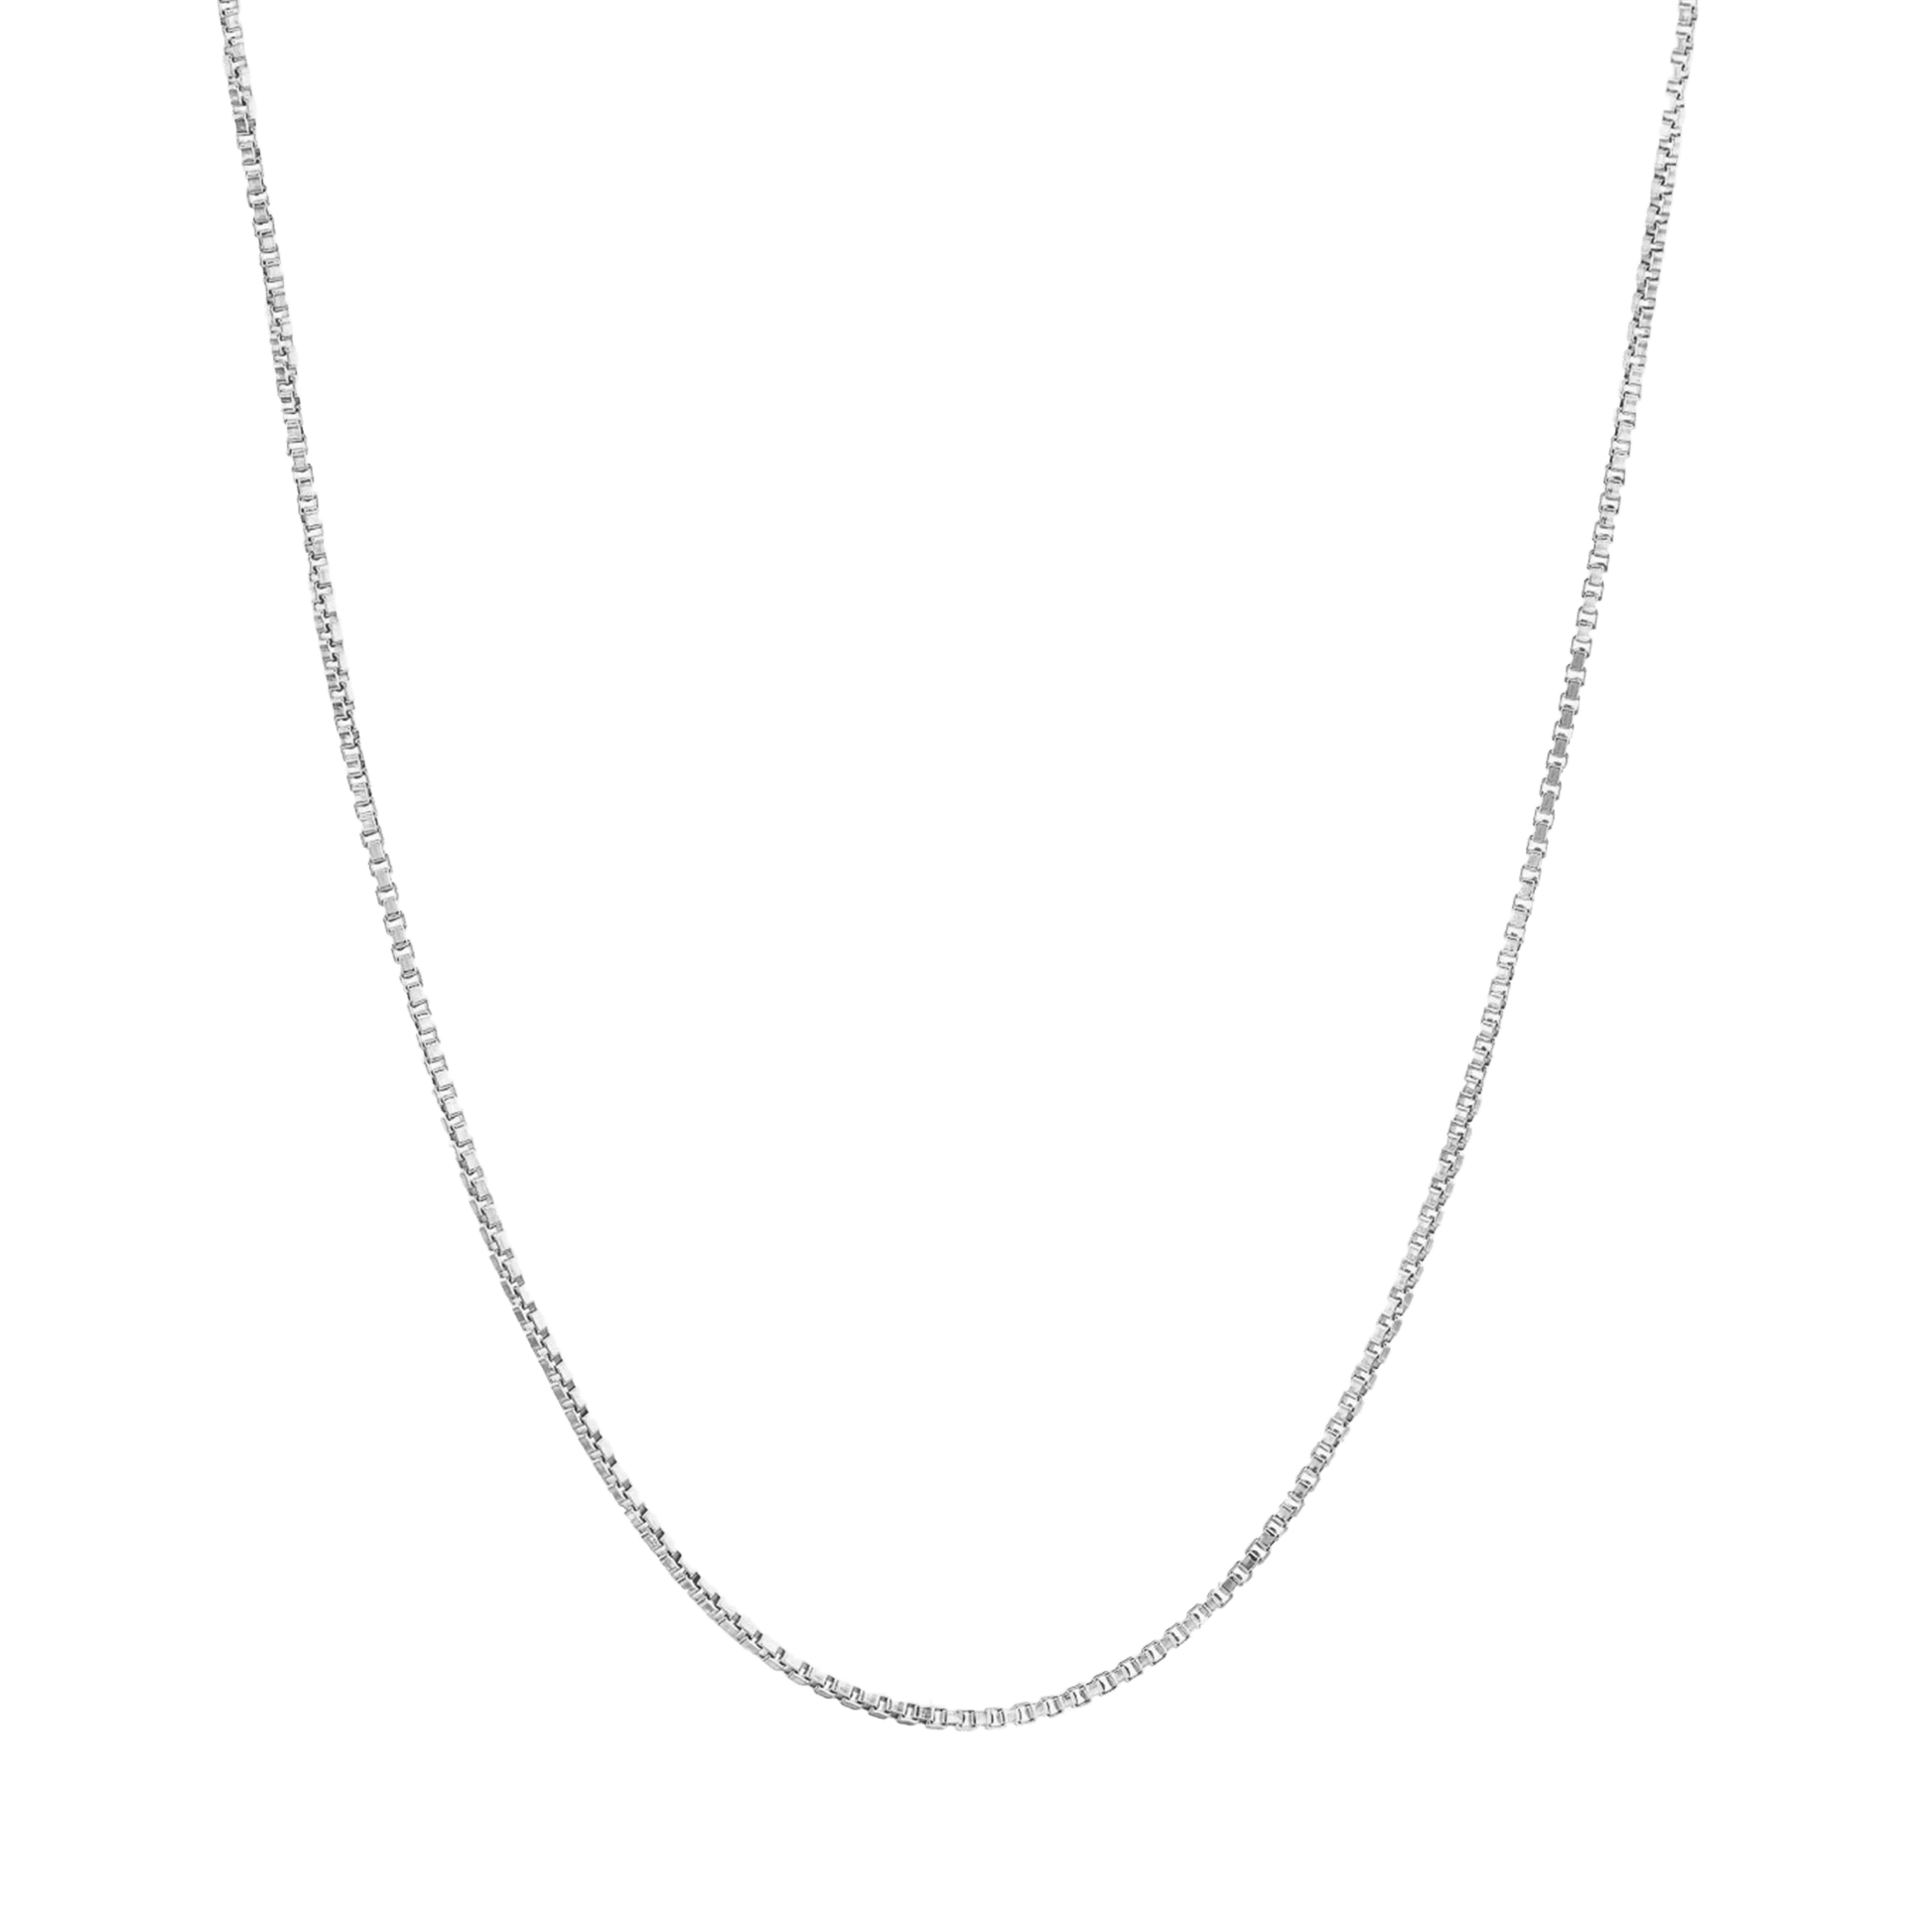 Box Chain Necklace - 925 Sterling Silver Chains magal-dev 